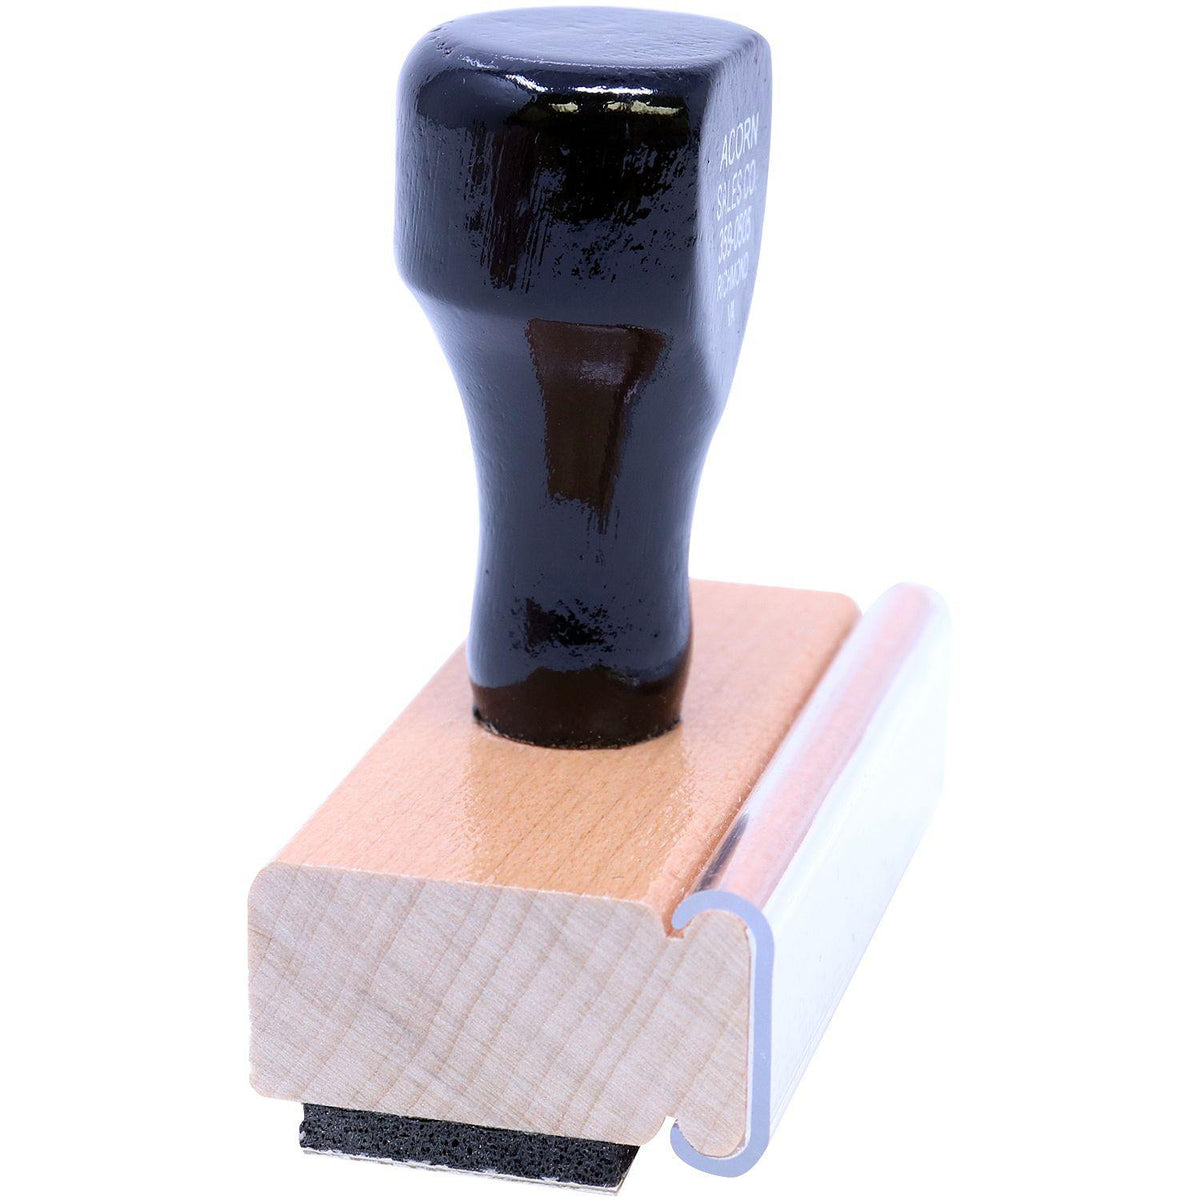 Side View of Large Covid-19 Tested Rubber Stamp at an Angle